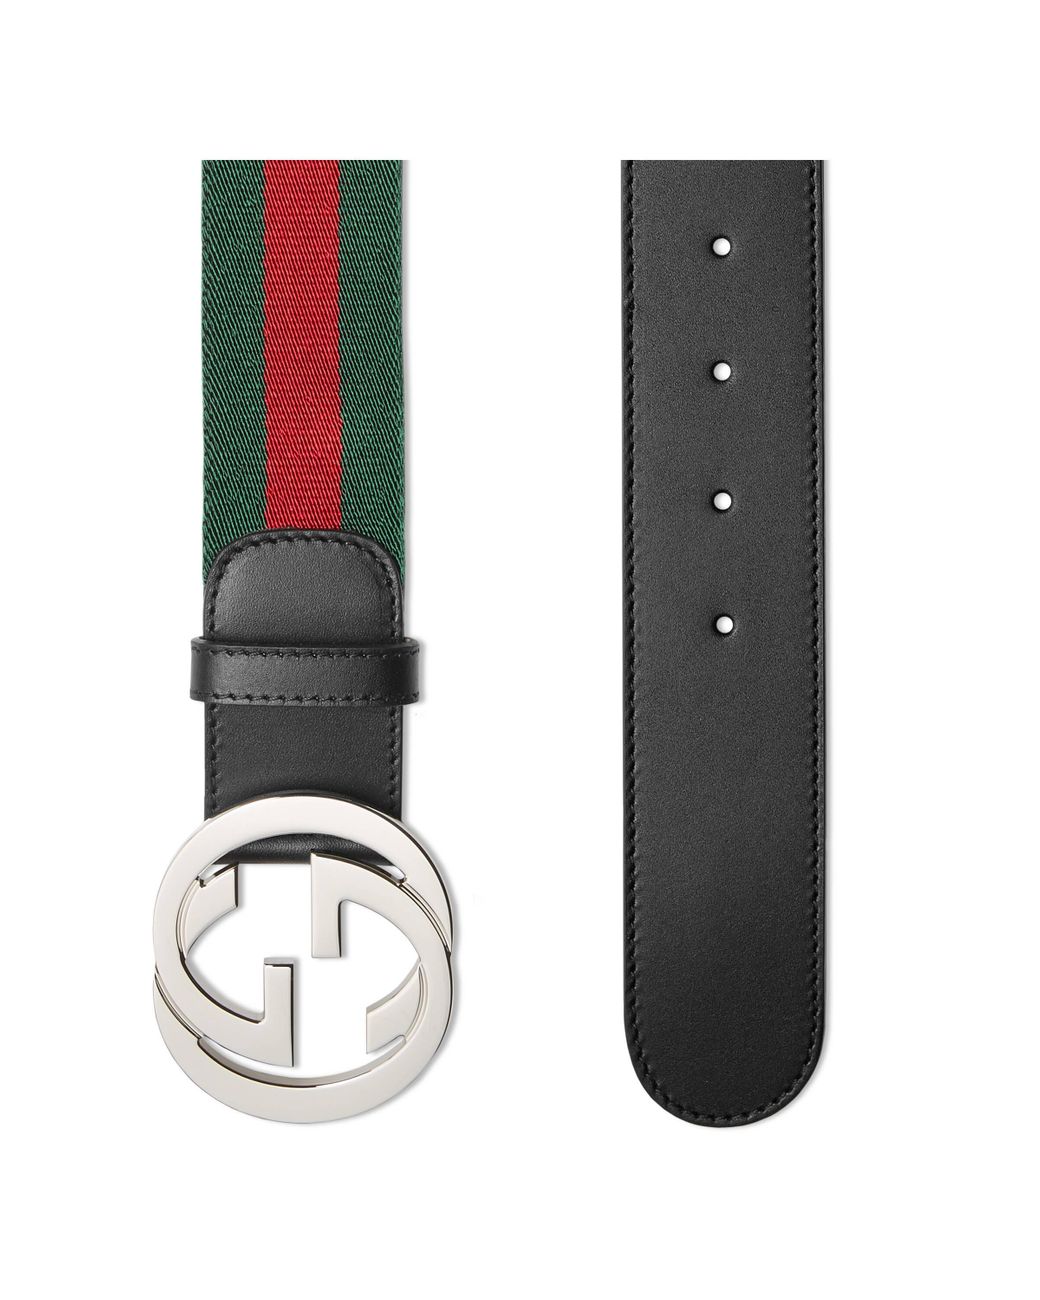 web belt with double g buckle